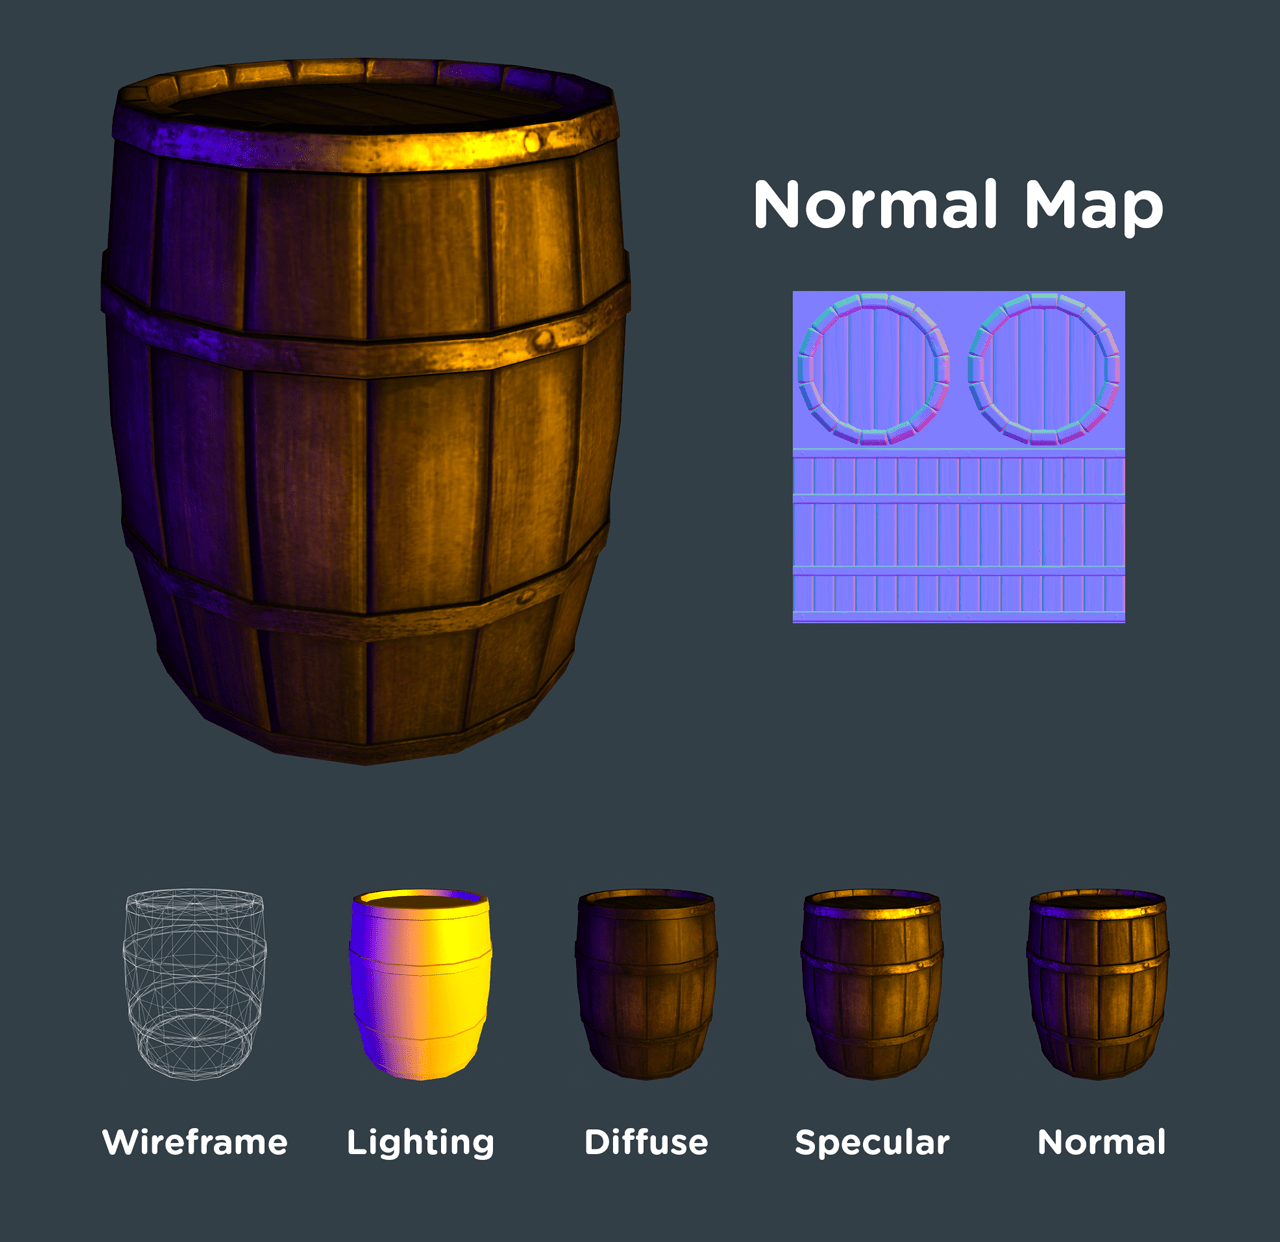 Normal map applied to the 3D geometry.